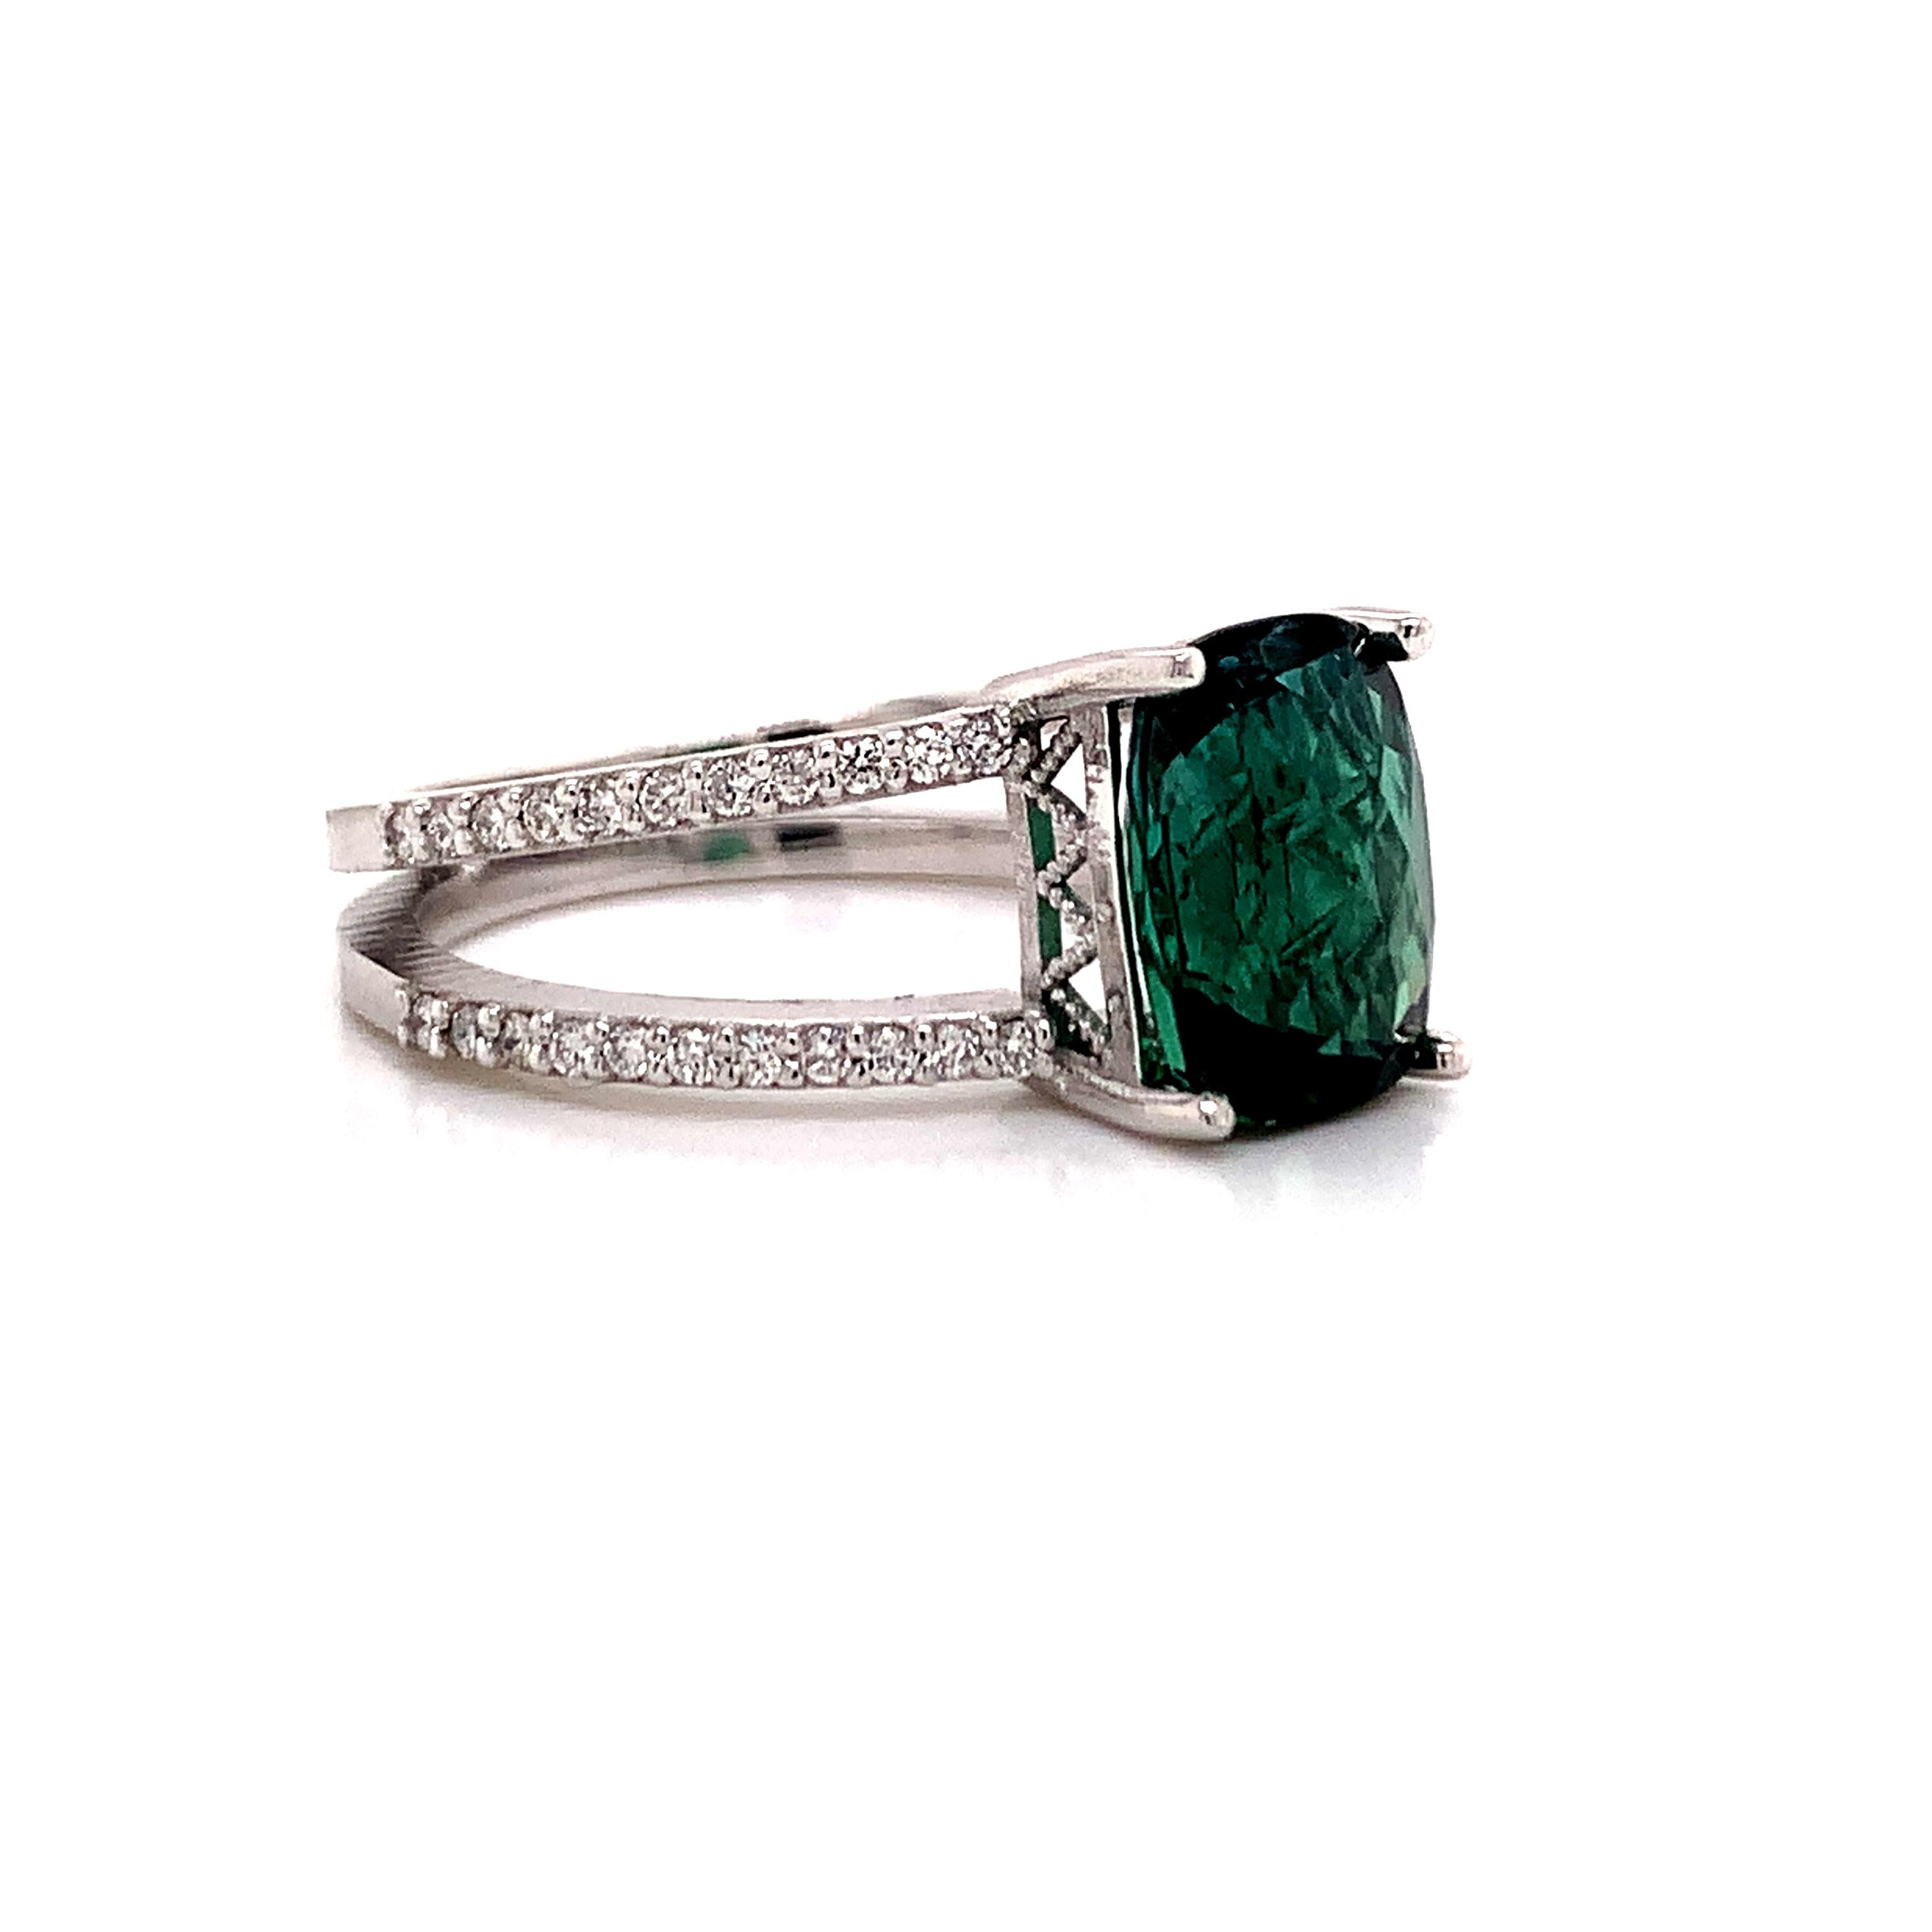 Natural Tourmaline Diamond Ring 14k White Gold 3.33 TCW Certified For Sale 2